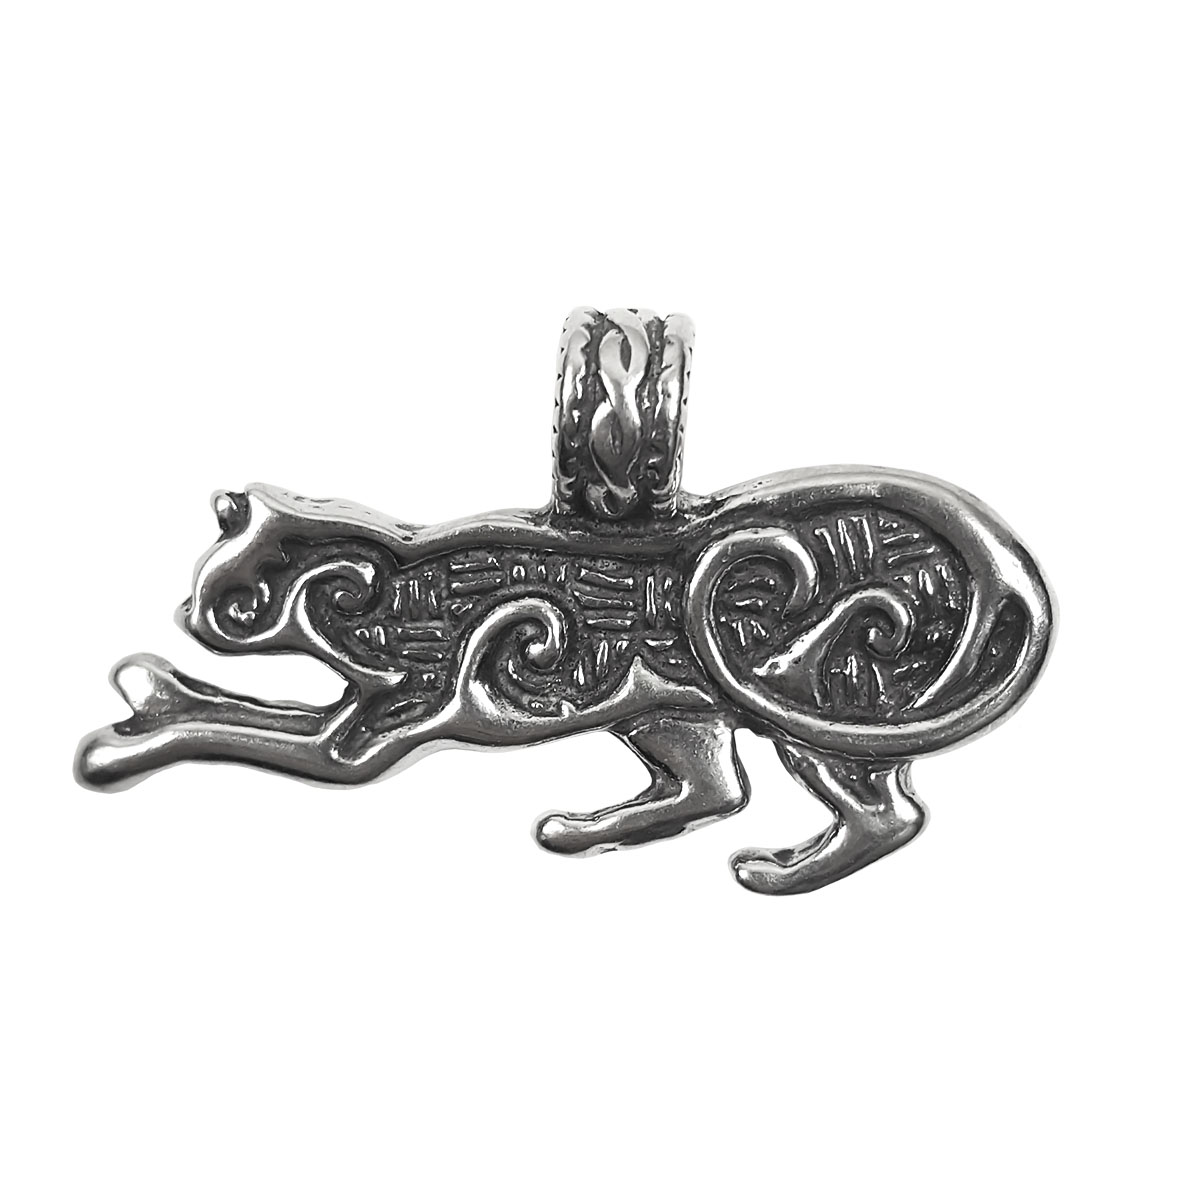 Cat Charm - Choose Your Sterling Silver Cat Charm to Add to Bracelet Flying Cat